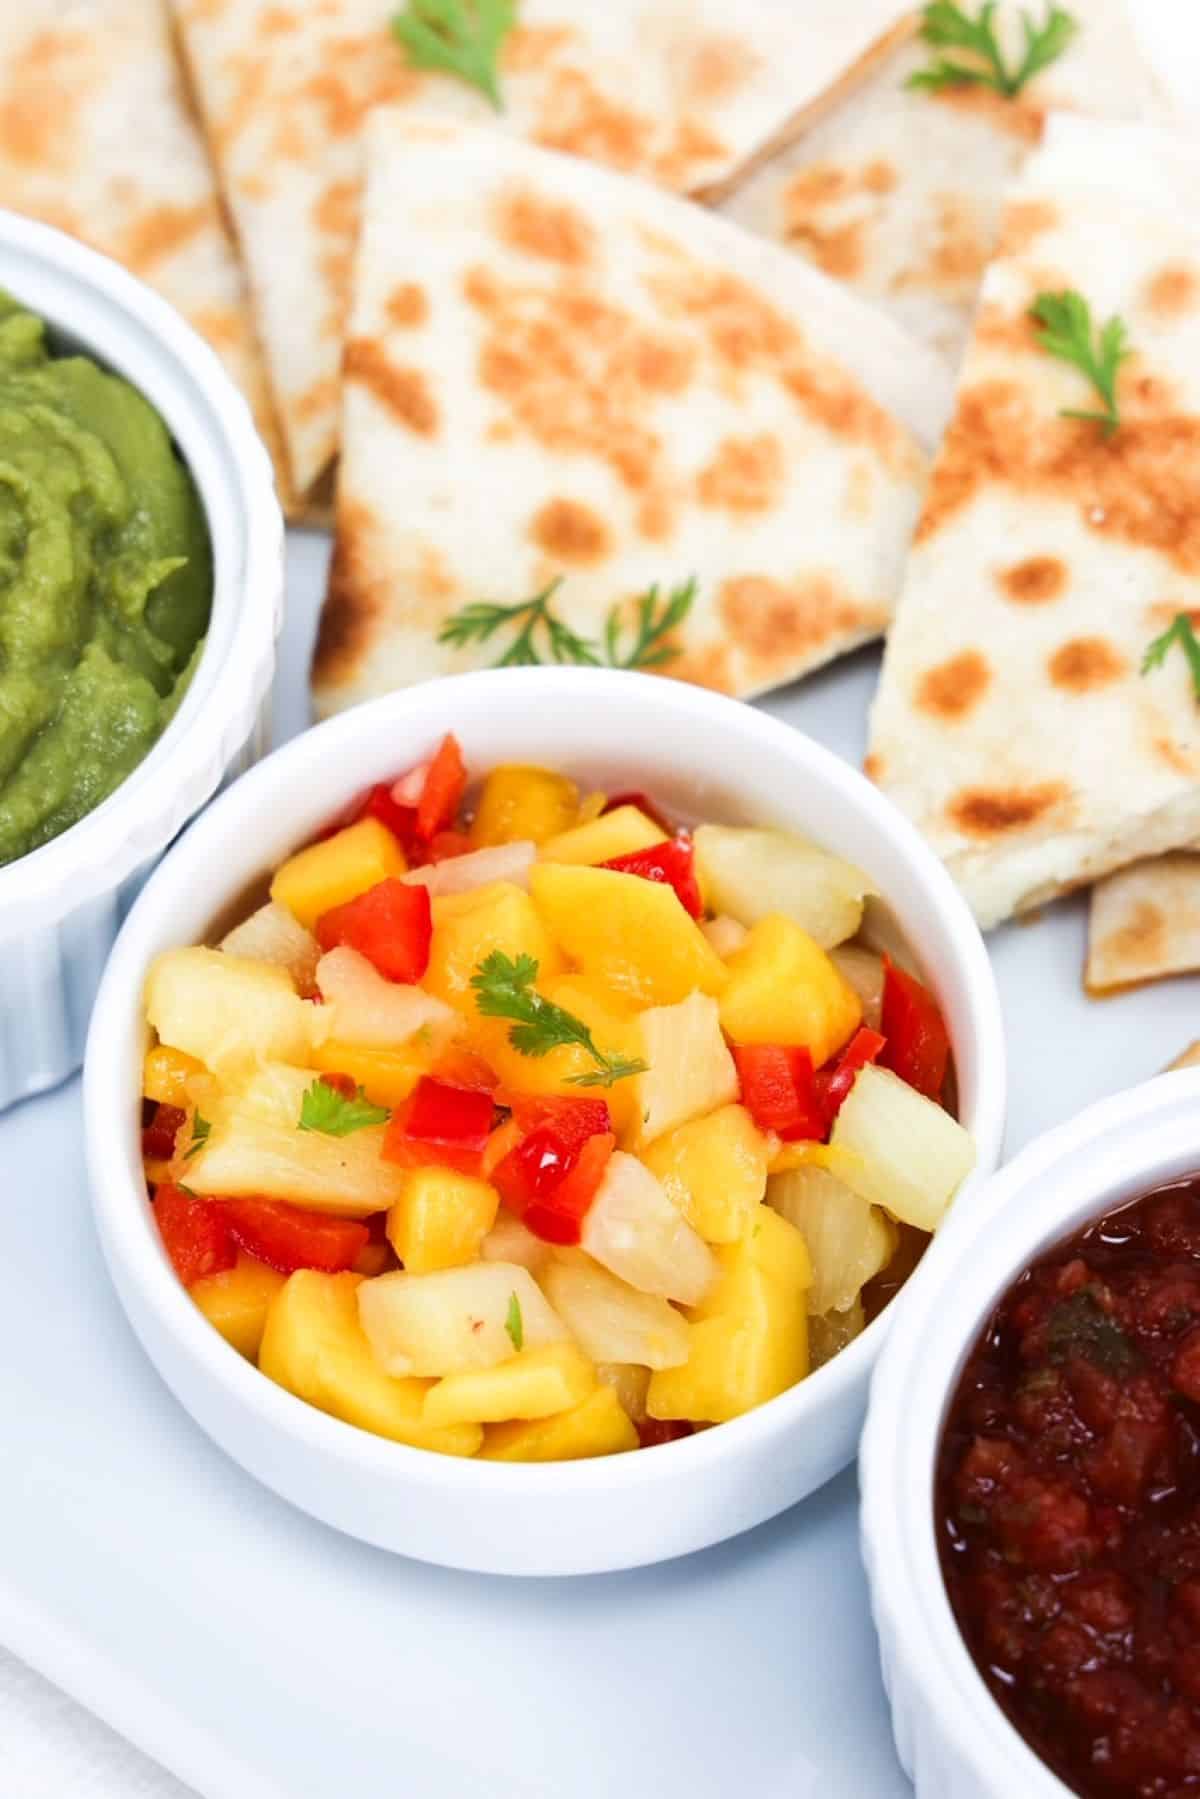 Pieces of cheese quesadilla plated with pineapple mango salsa, guacamole, and salsa.